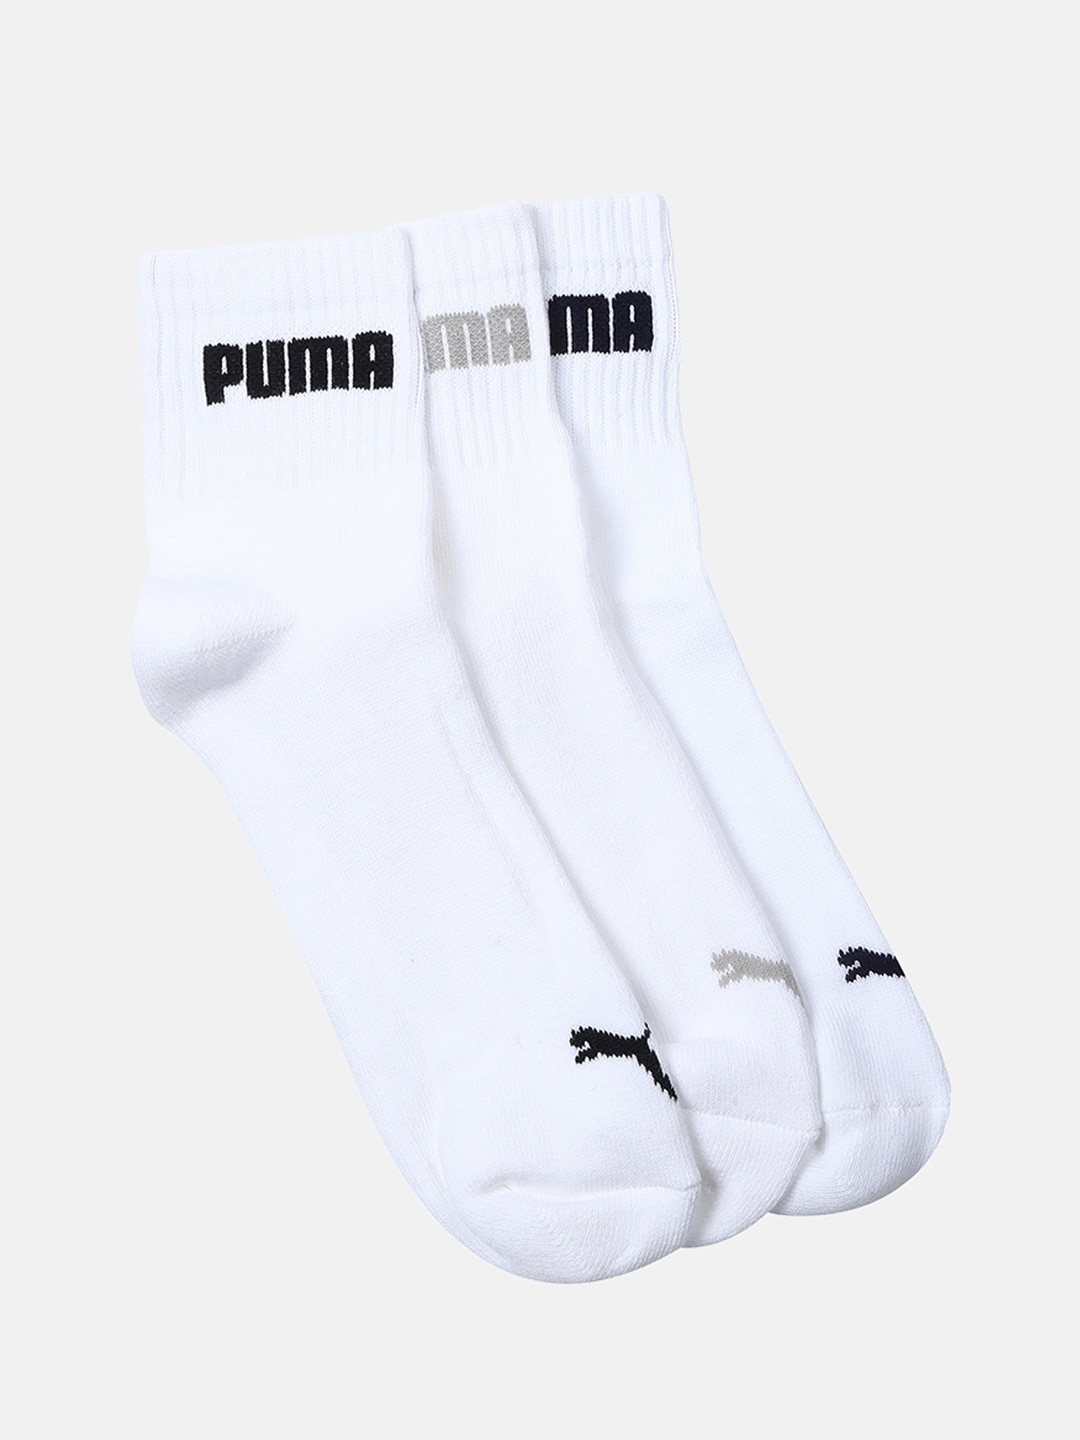 Puma Adults White Black Pack of 3 Brand Logo Patterned Calf Length Socks Price in India